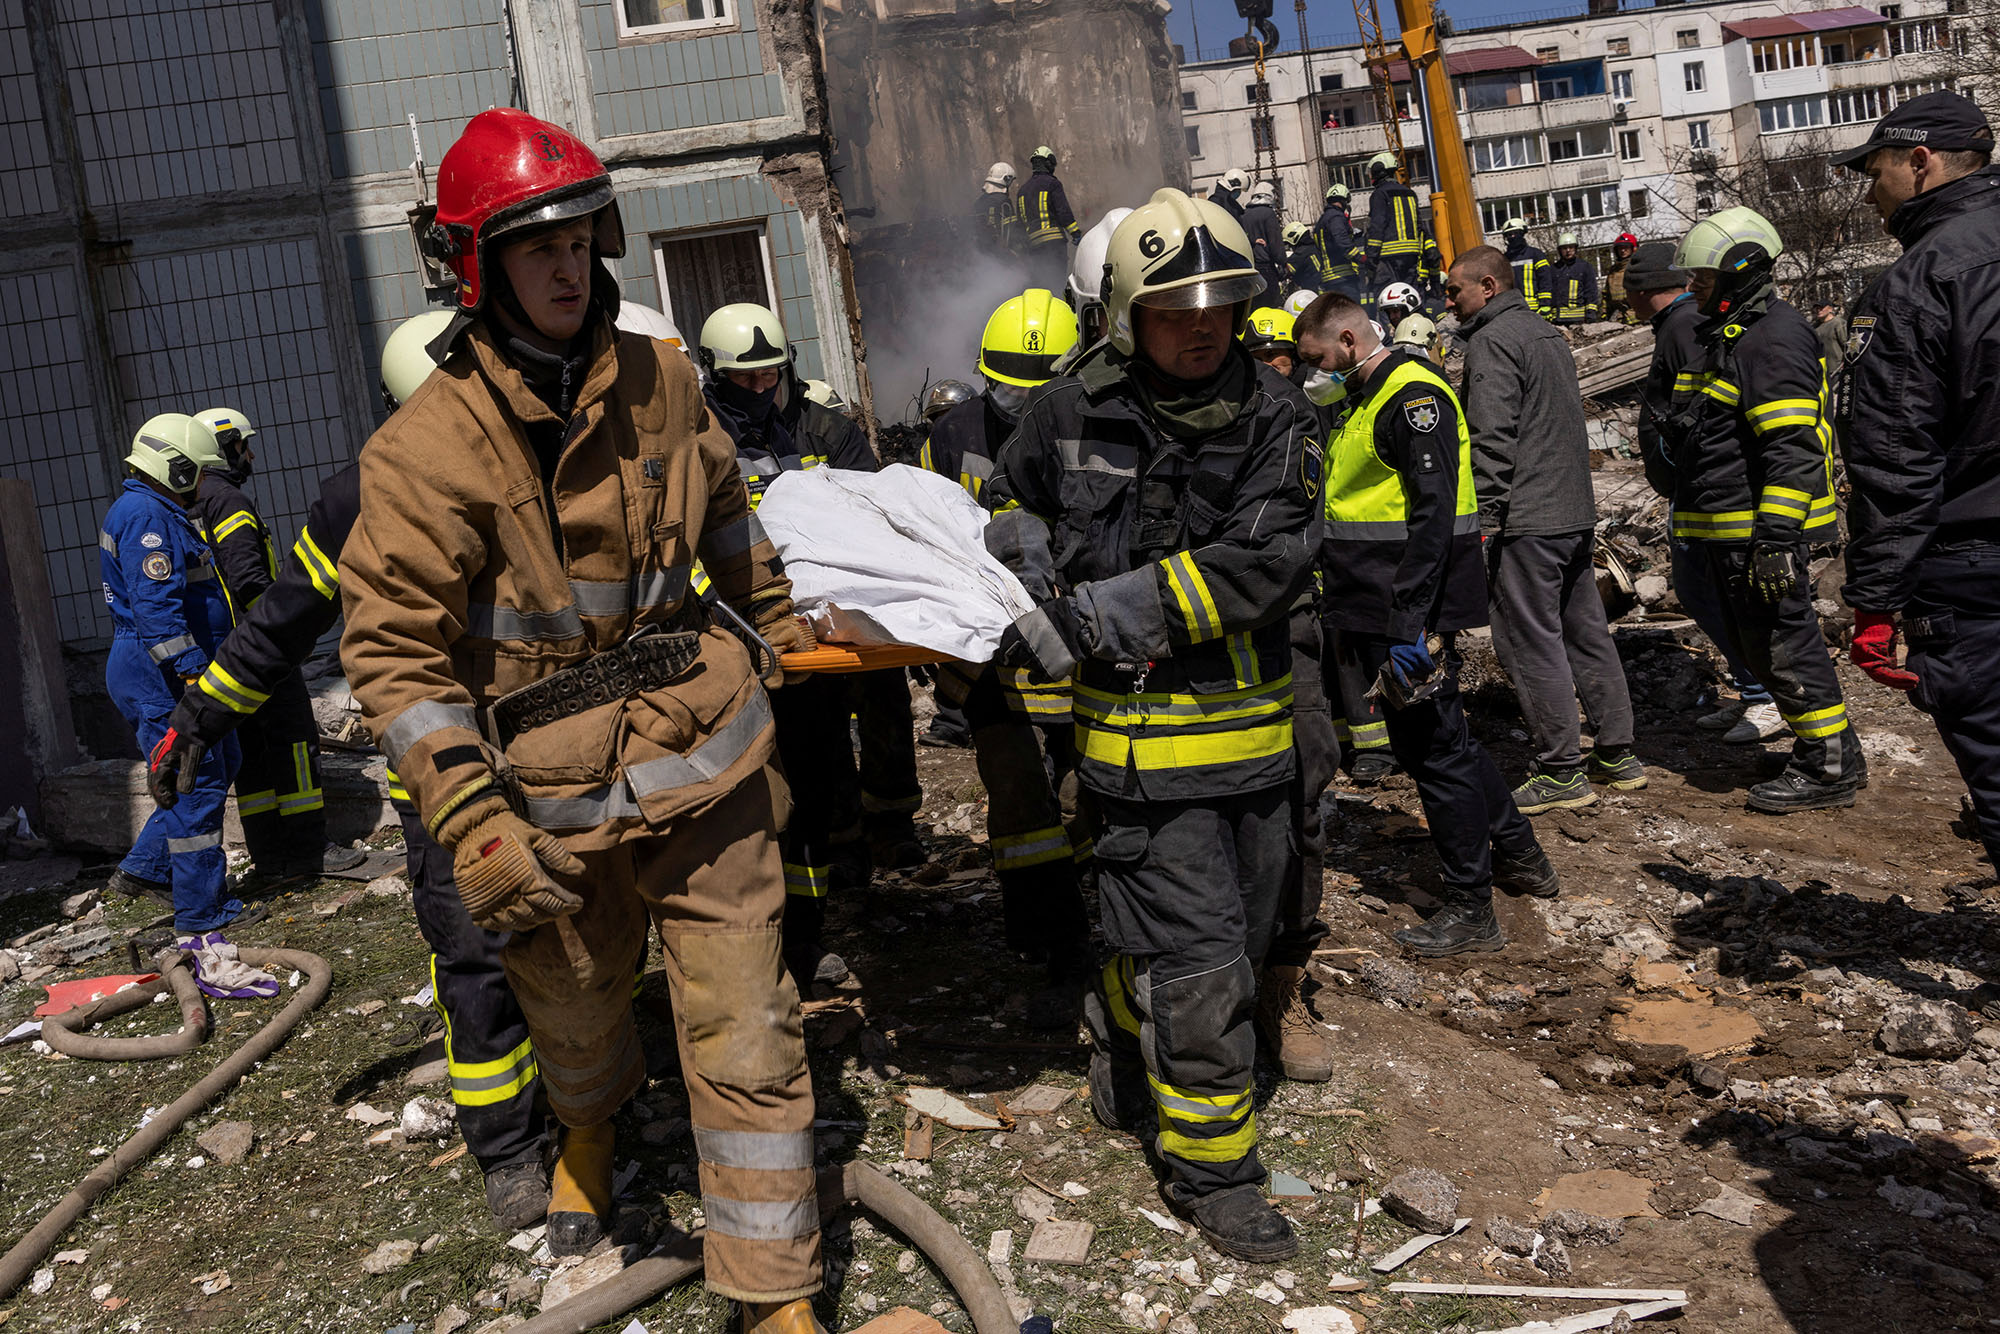 Rescuers carry a covered body as they work at the site of a heavily damaged residential building in the town of Uman, Cherkasy region, Ukraine, on April 28.